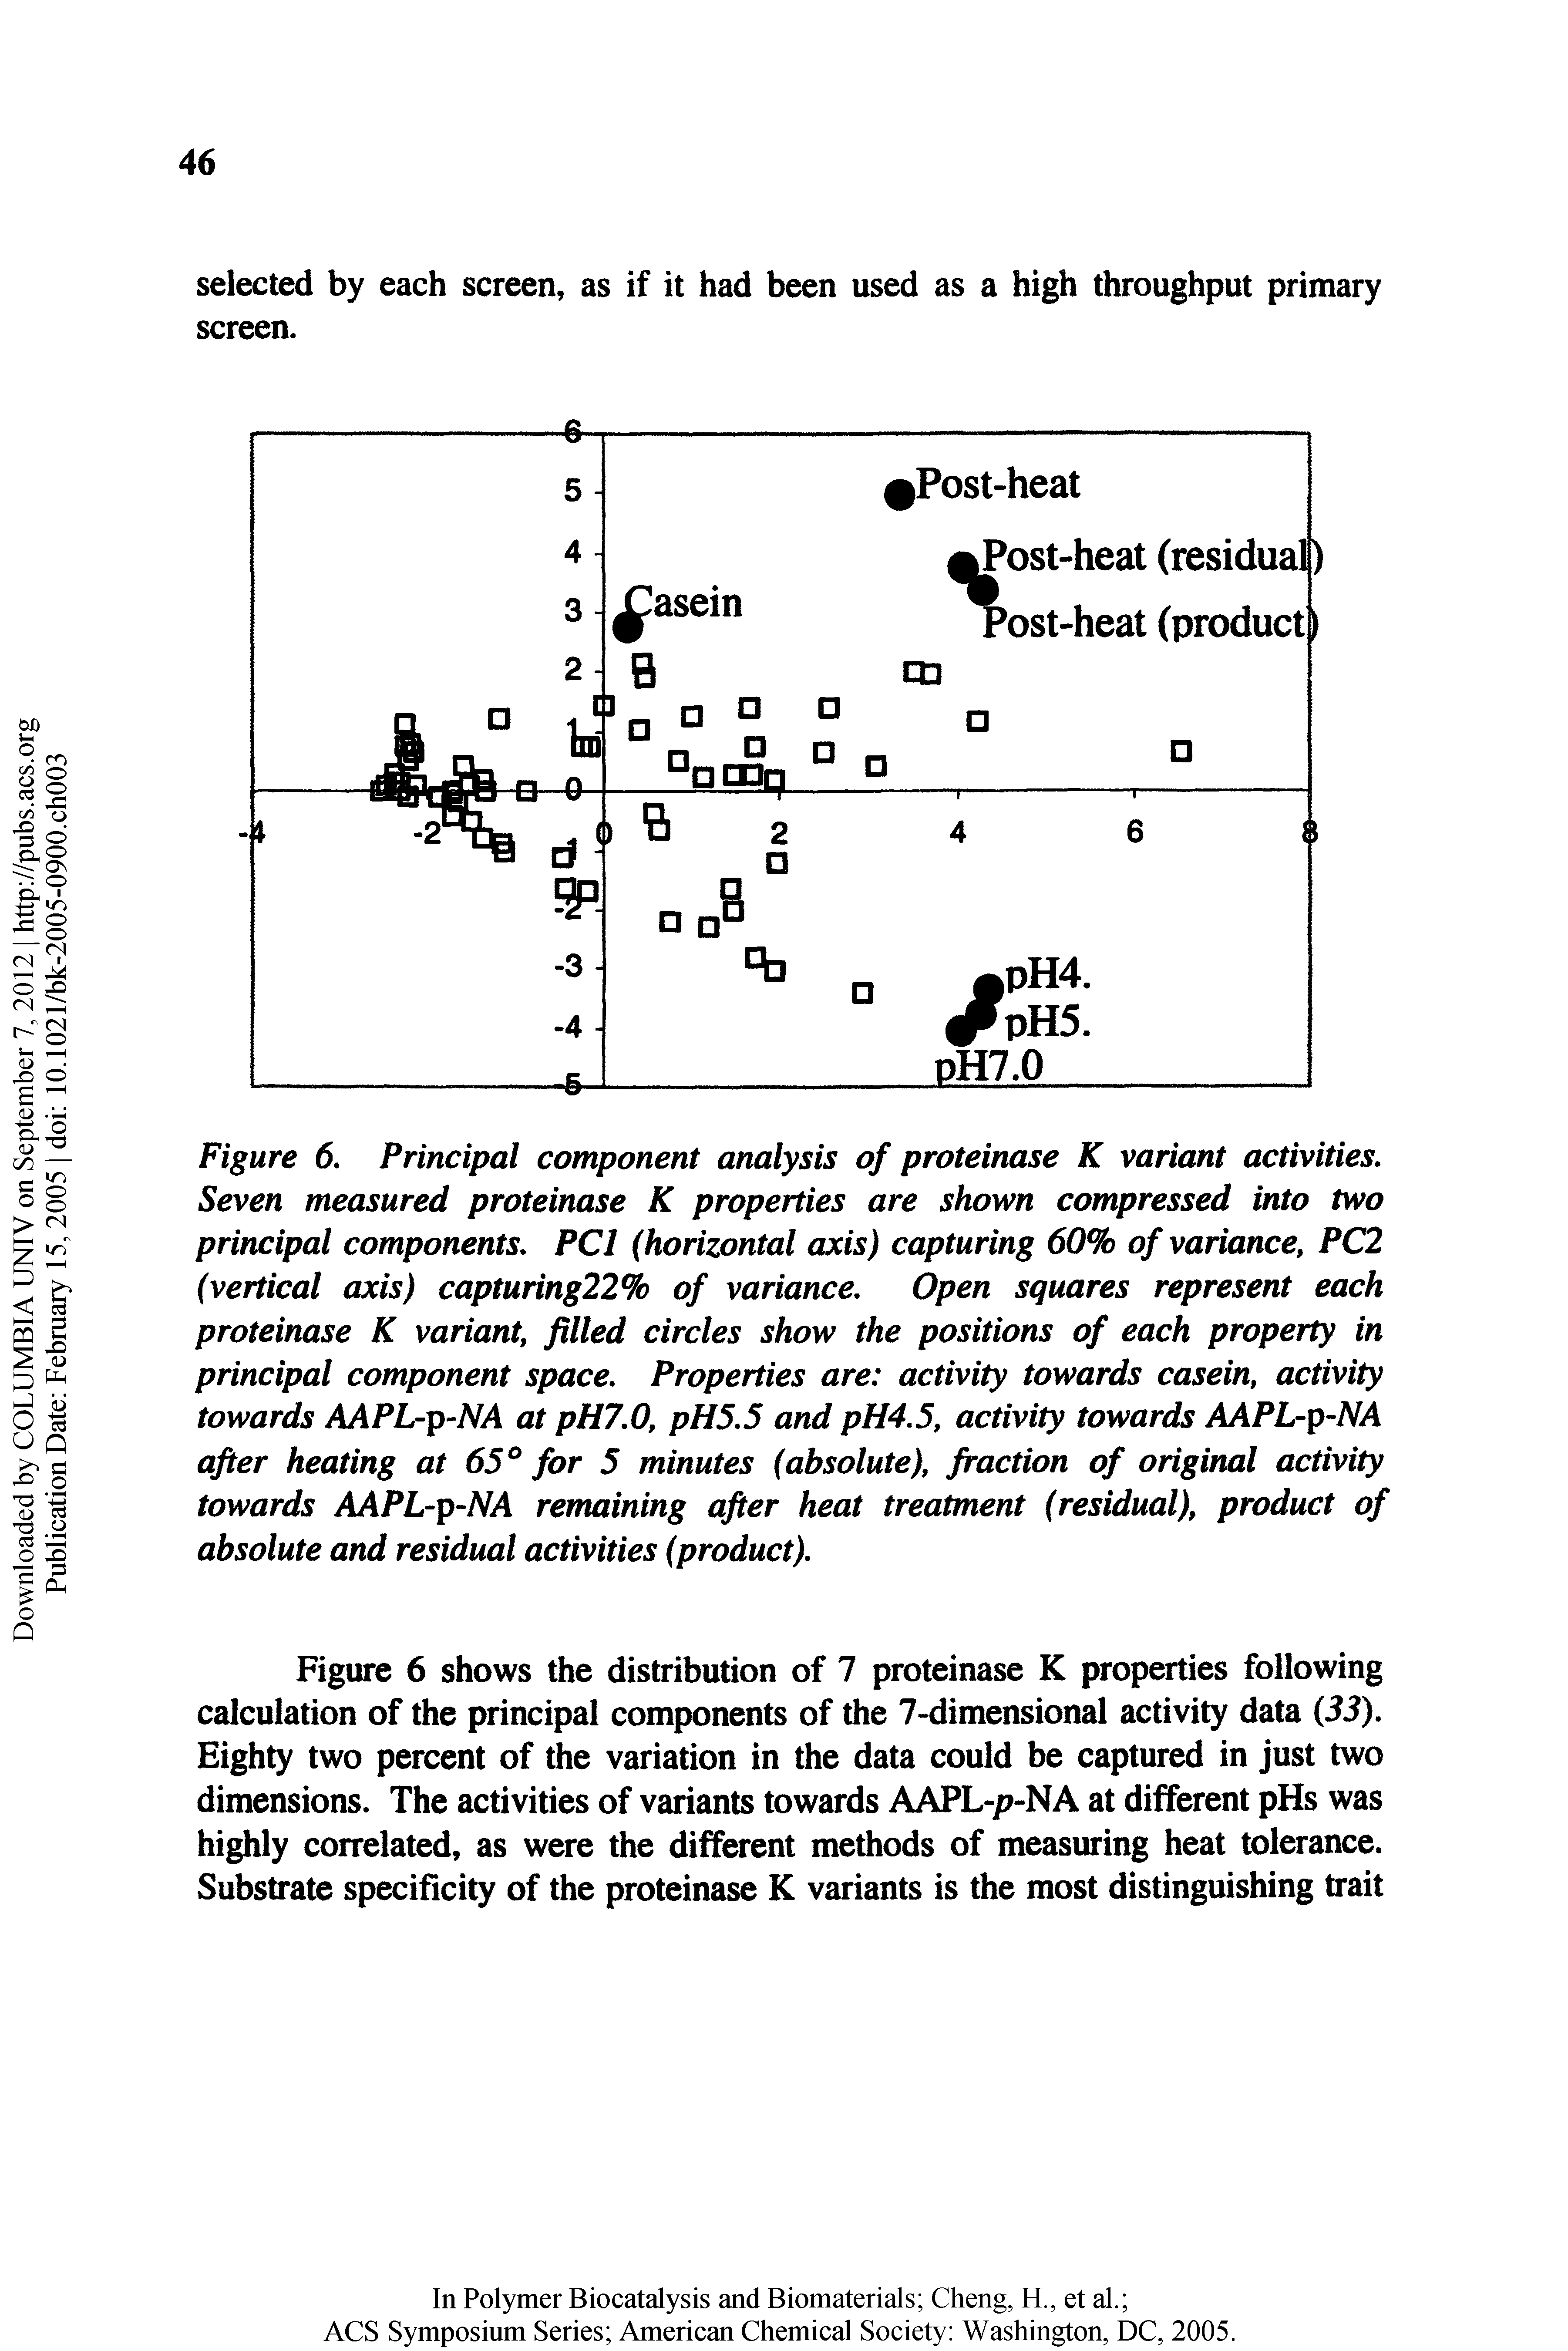 Figure 6. Principal component analysis of proteinase K variant activities. Seven measured proteinase K properties are shown compressed into two principal components. PCI (horizontal axis) capturing 60% of variance, PC2 (vertical axis) capturing22% of variance. Open squares represent each proteinase K variant, filled circles show the positions of each property in principal component space. Properties are activity towards casein, activity towards AAPL-p-NA at pHJ.O, pH5.5 and pH4.5, activity towards AAPL-p-NA after heating at 65° for 5 minutes (absolute), fraction of original activity towards AAPL-p-NA remaining after heat treatment (residual), product of absolute and residual activities (product).